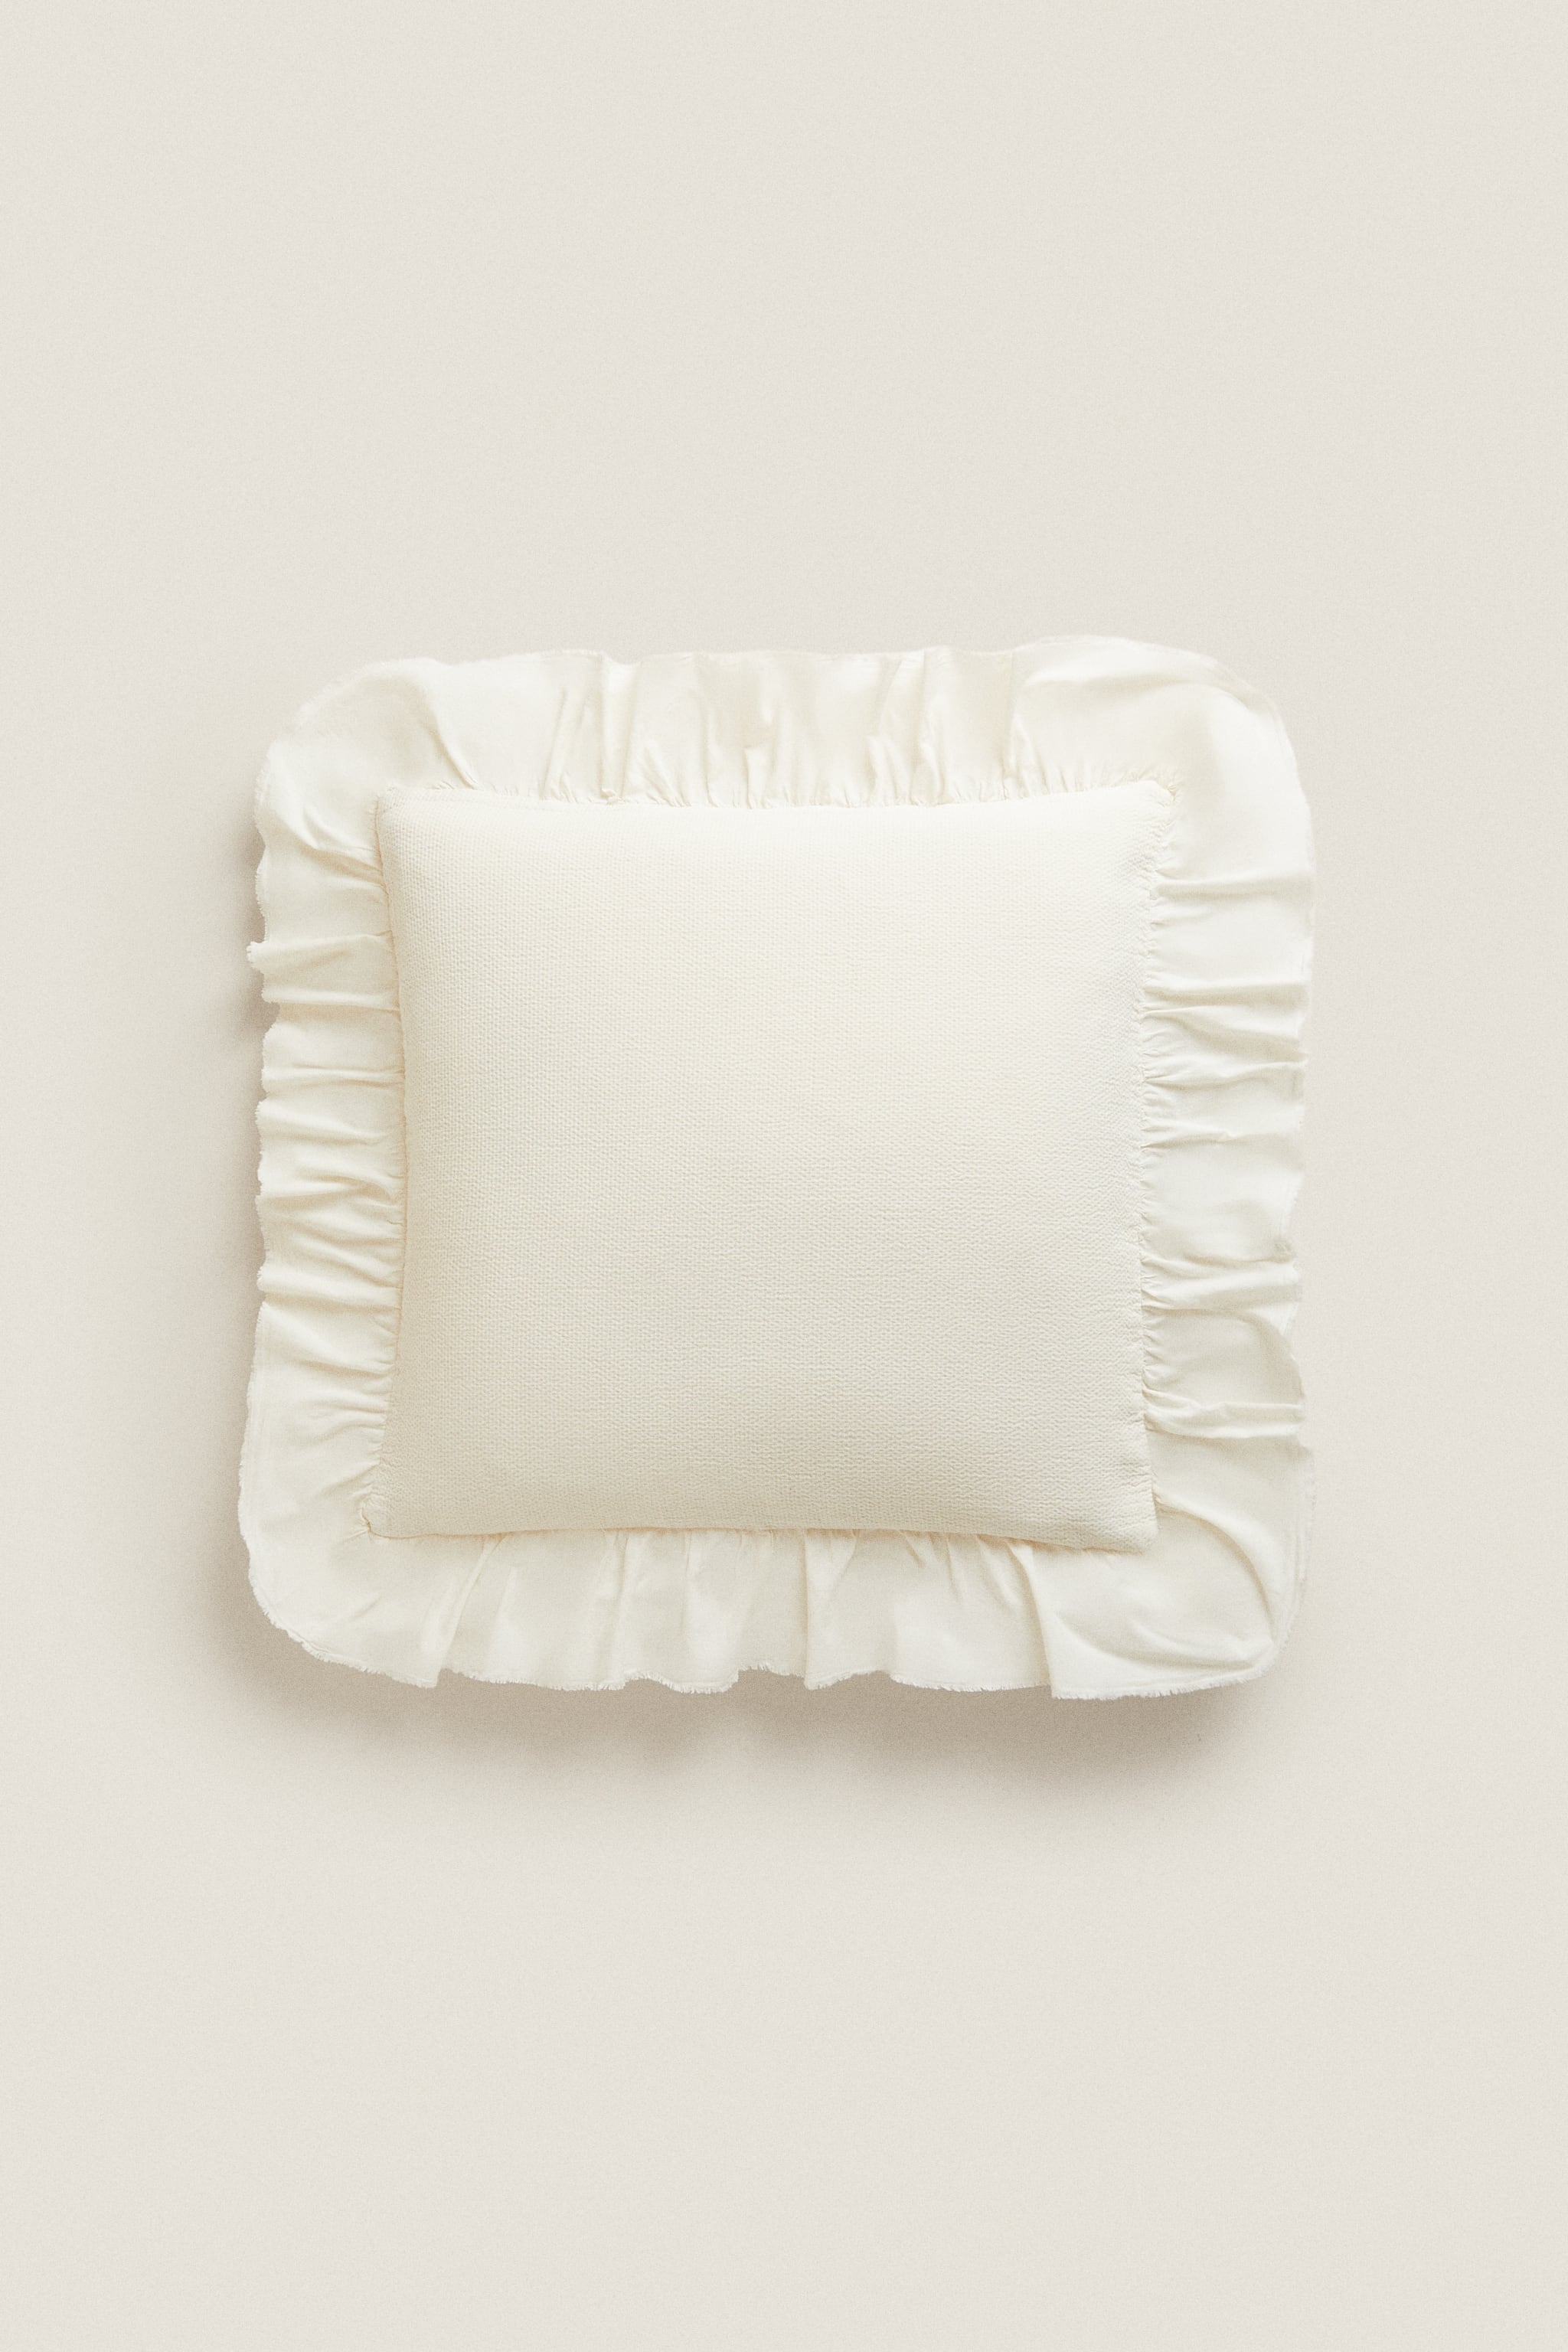 THROW PILLOW WITH RUFFLE TRIM